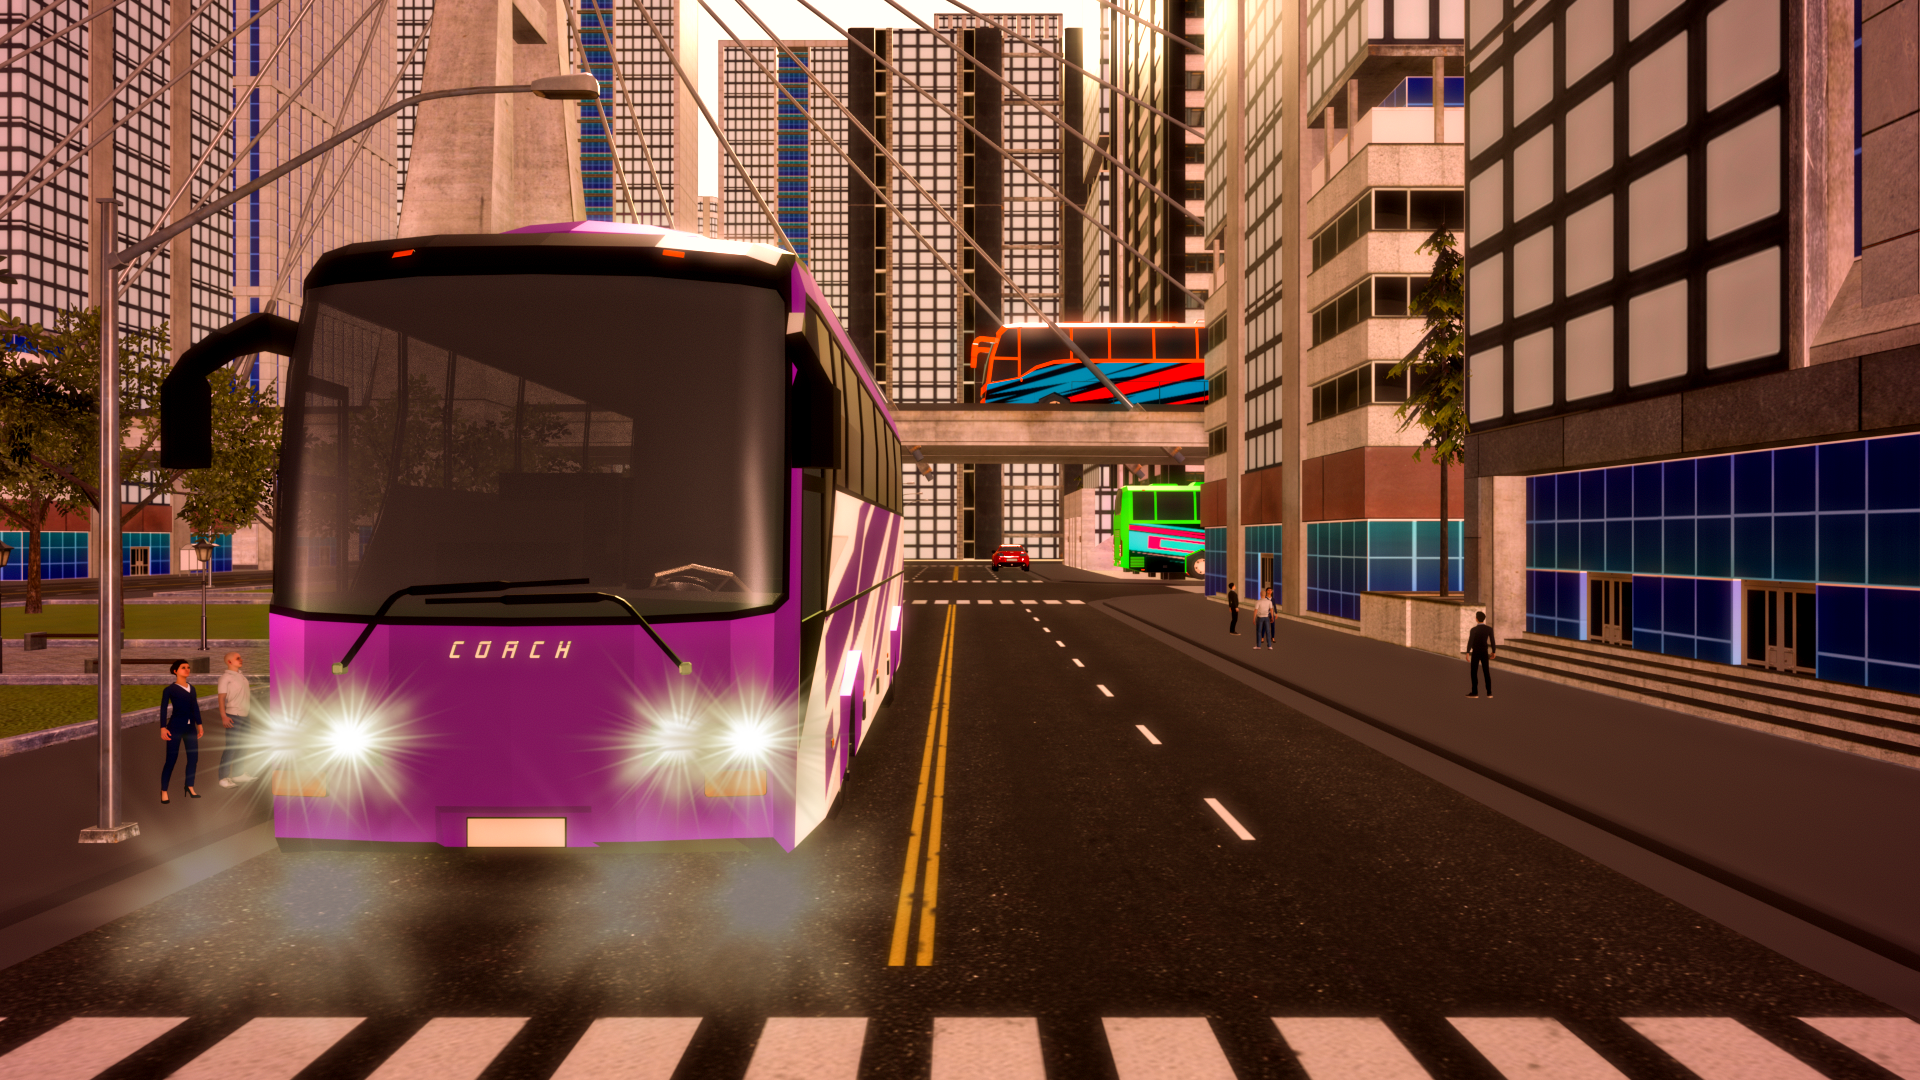 Live Bus Simulator android iOS apk download for free-TapTap